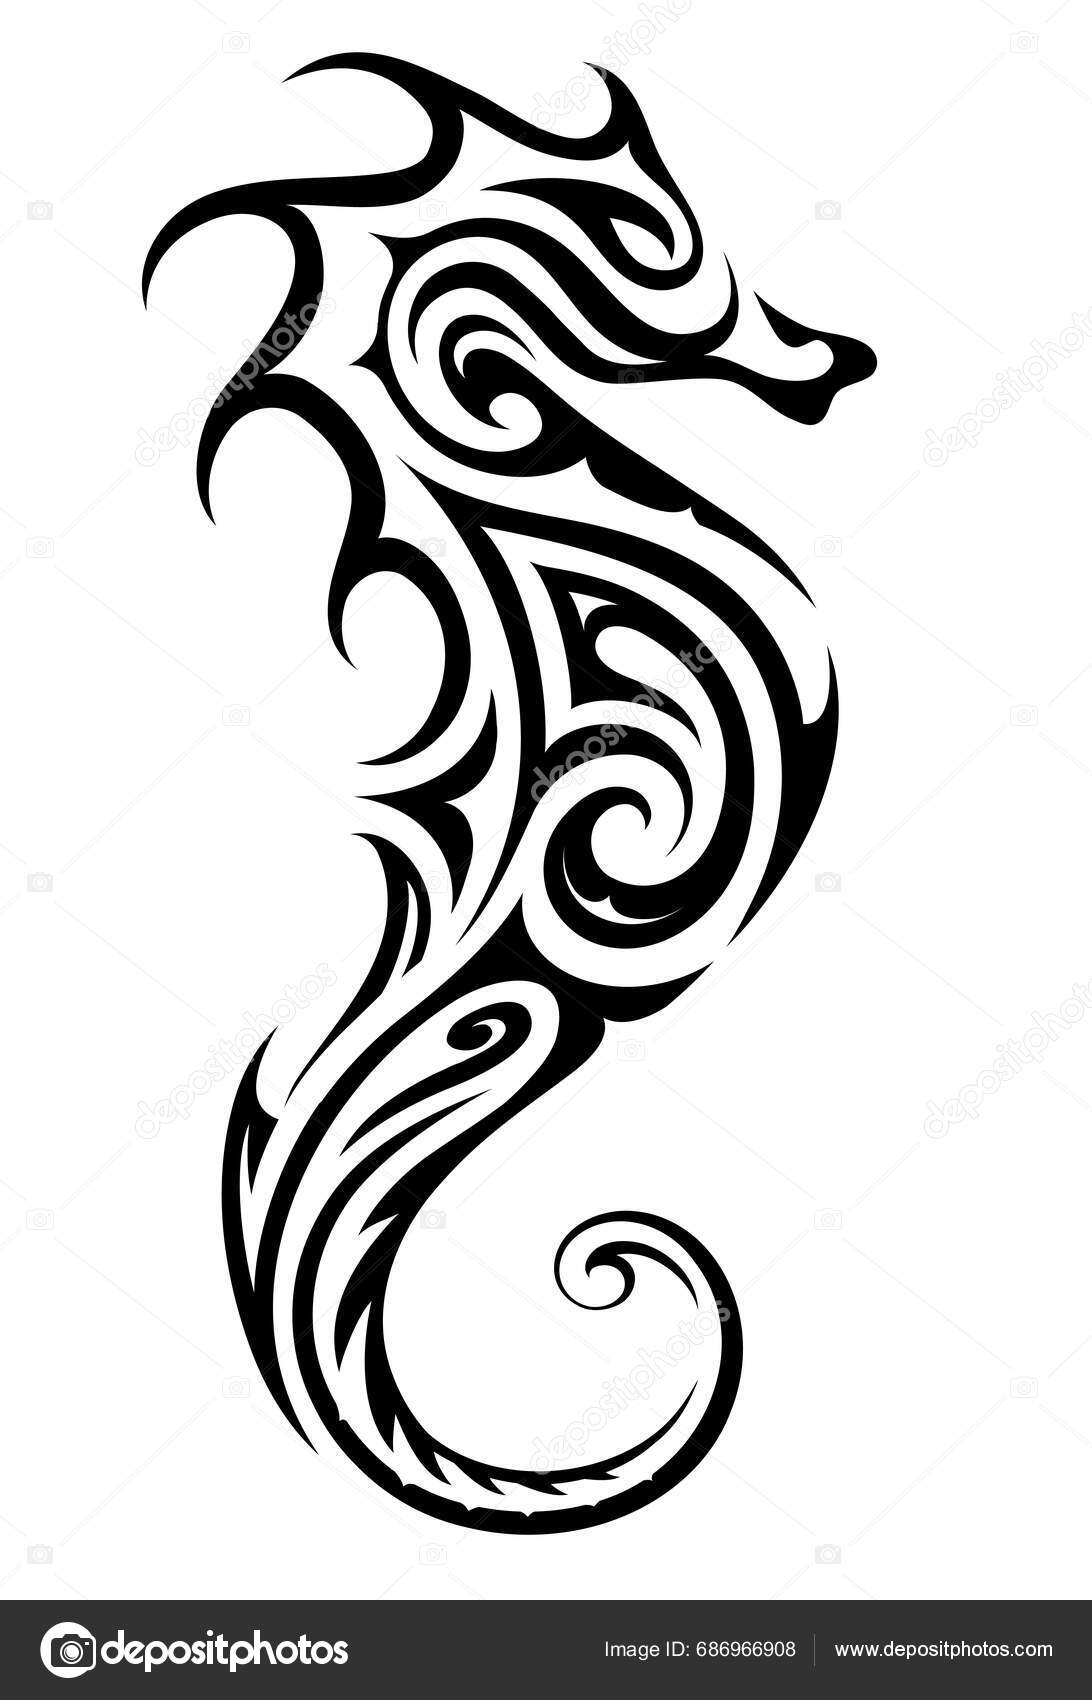 Flaming Seahorse Logo by mort-aux-arts on DeviantArt